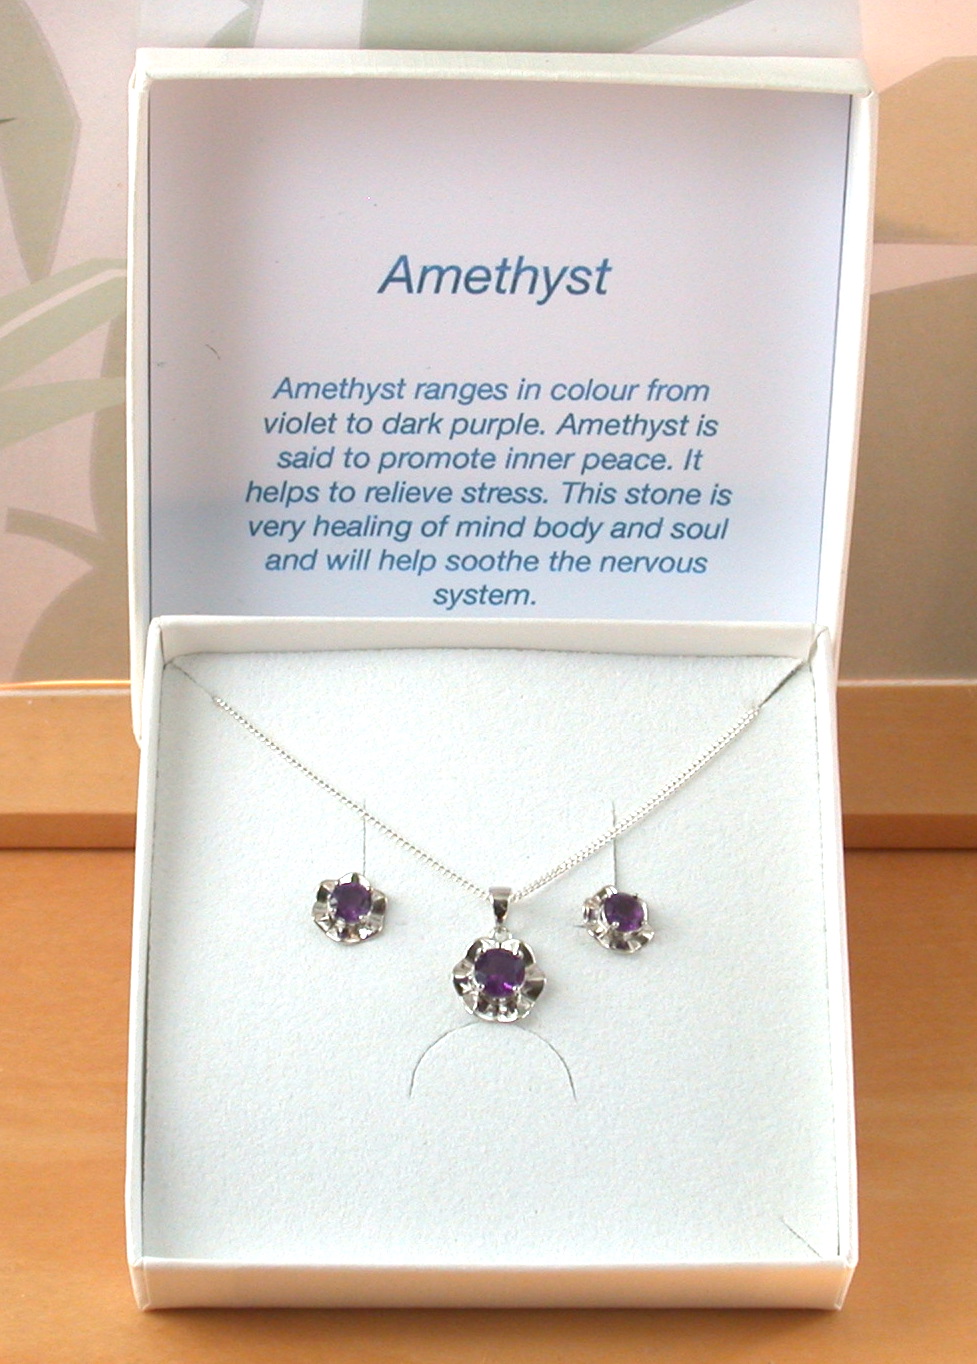 amethyst necklace and earrings